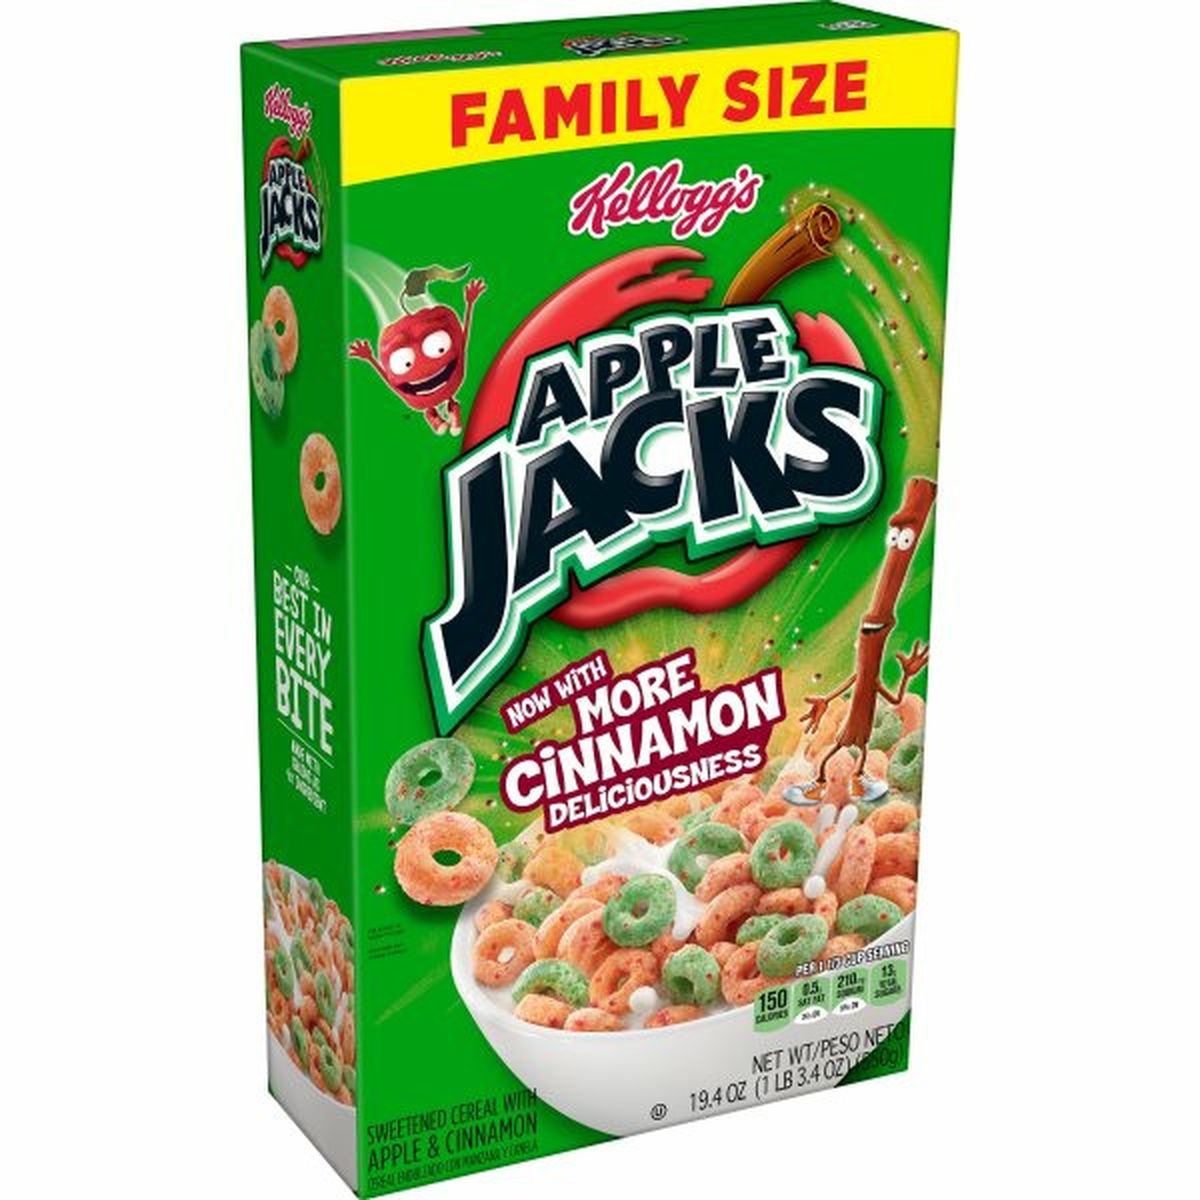 Calories in Kellogg's Apple Jacks Cereal Kellogg's Apple Jacks Breakfast Cereal, Original, Family Size, 19.4oz